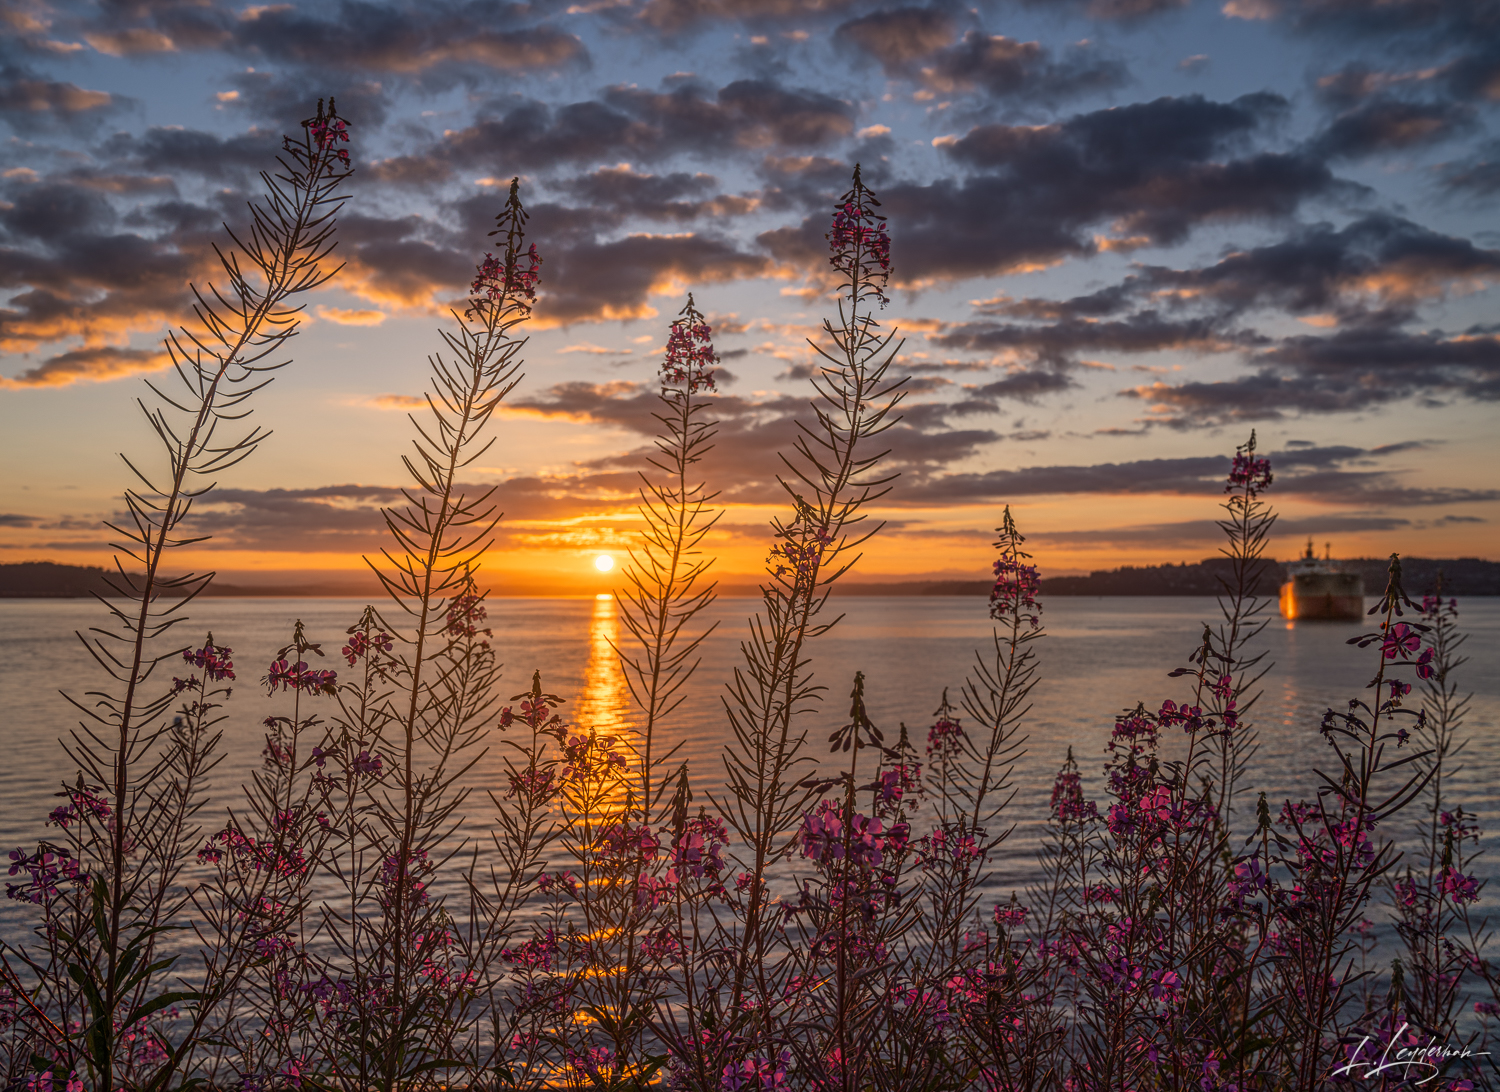 "Fireweed Finale"As the sun performs its daily finale, it sets the sky ablaze, mirroring the fiery hues of the fireweed in the...